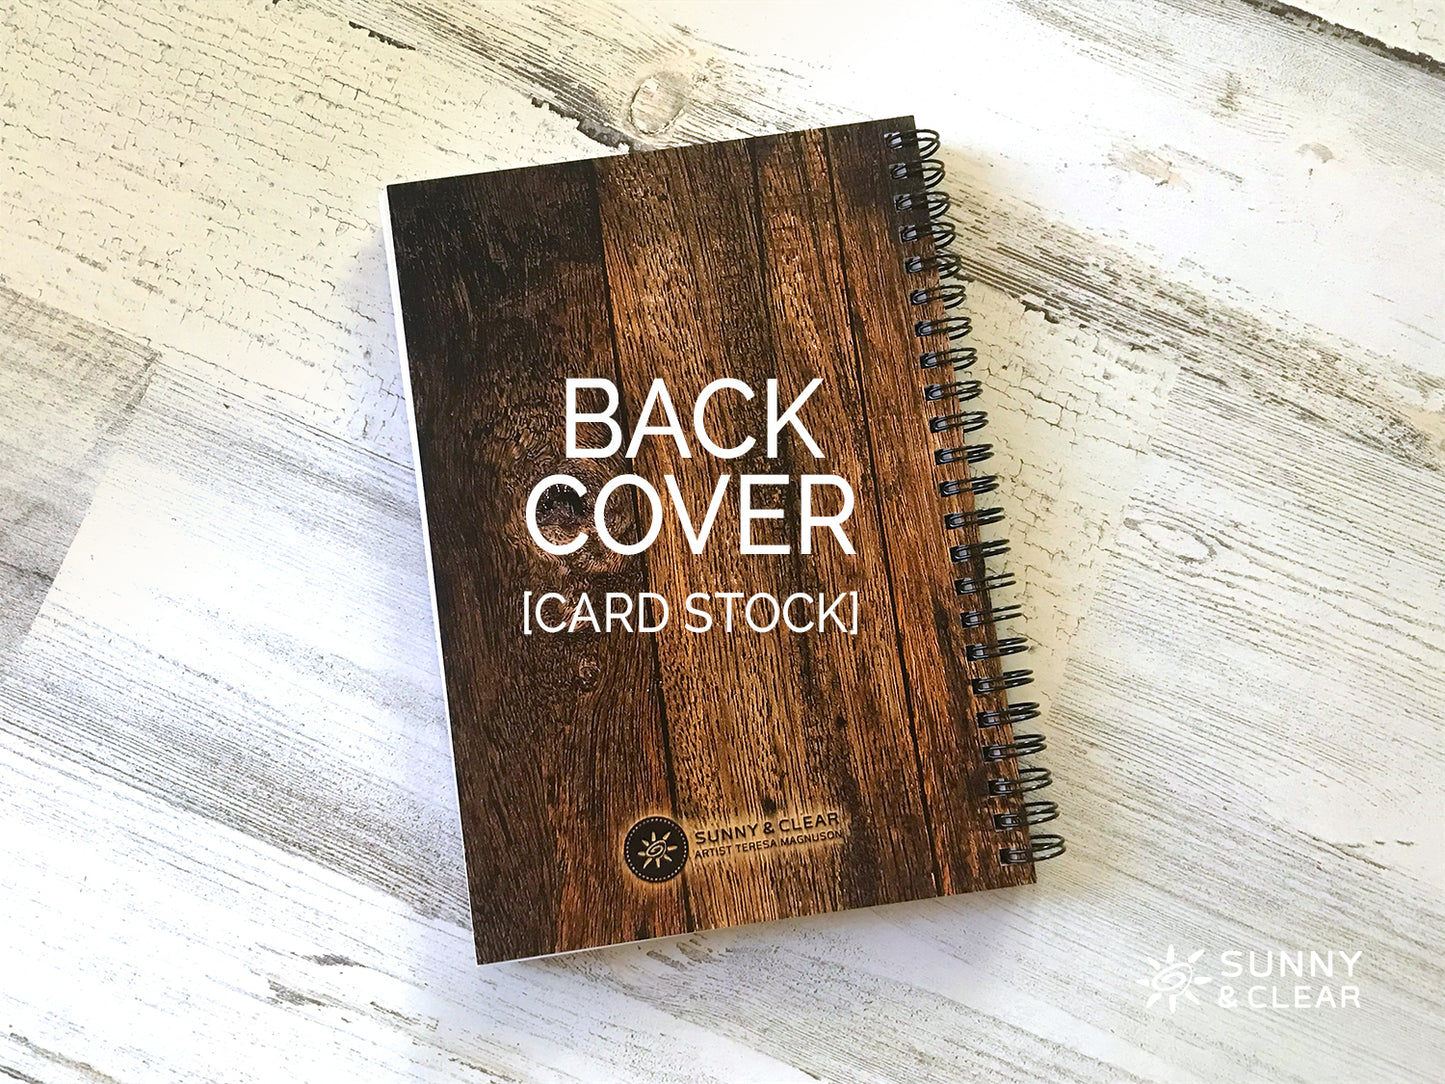 Custom Guestbook Using Your Logo, Personalized Wood Guest Book, AirBNB VRBO